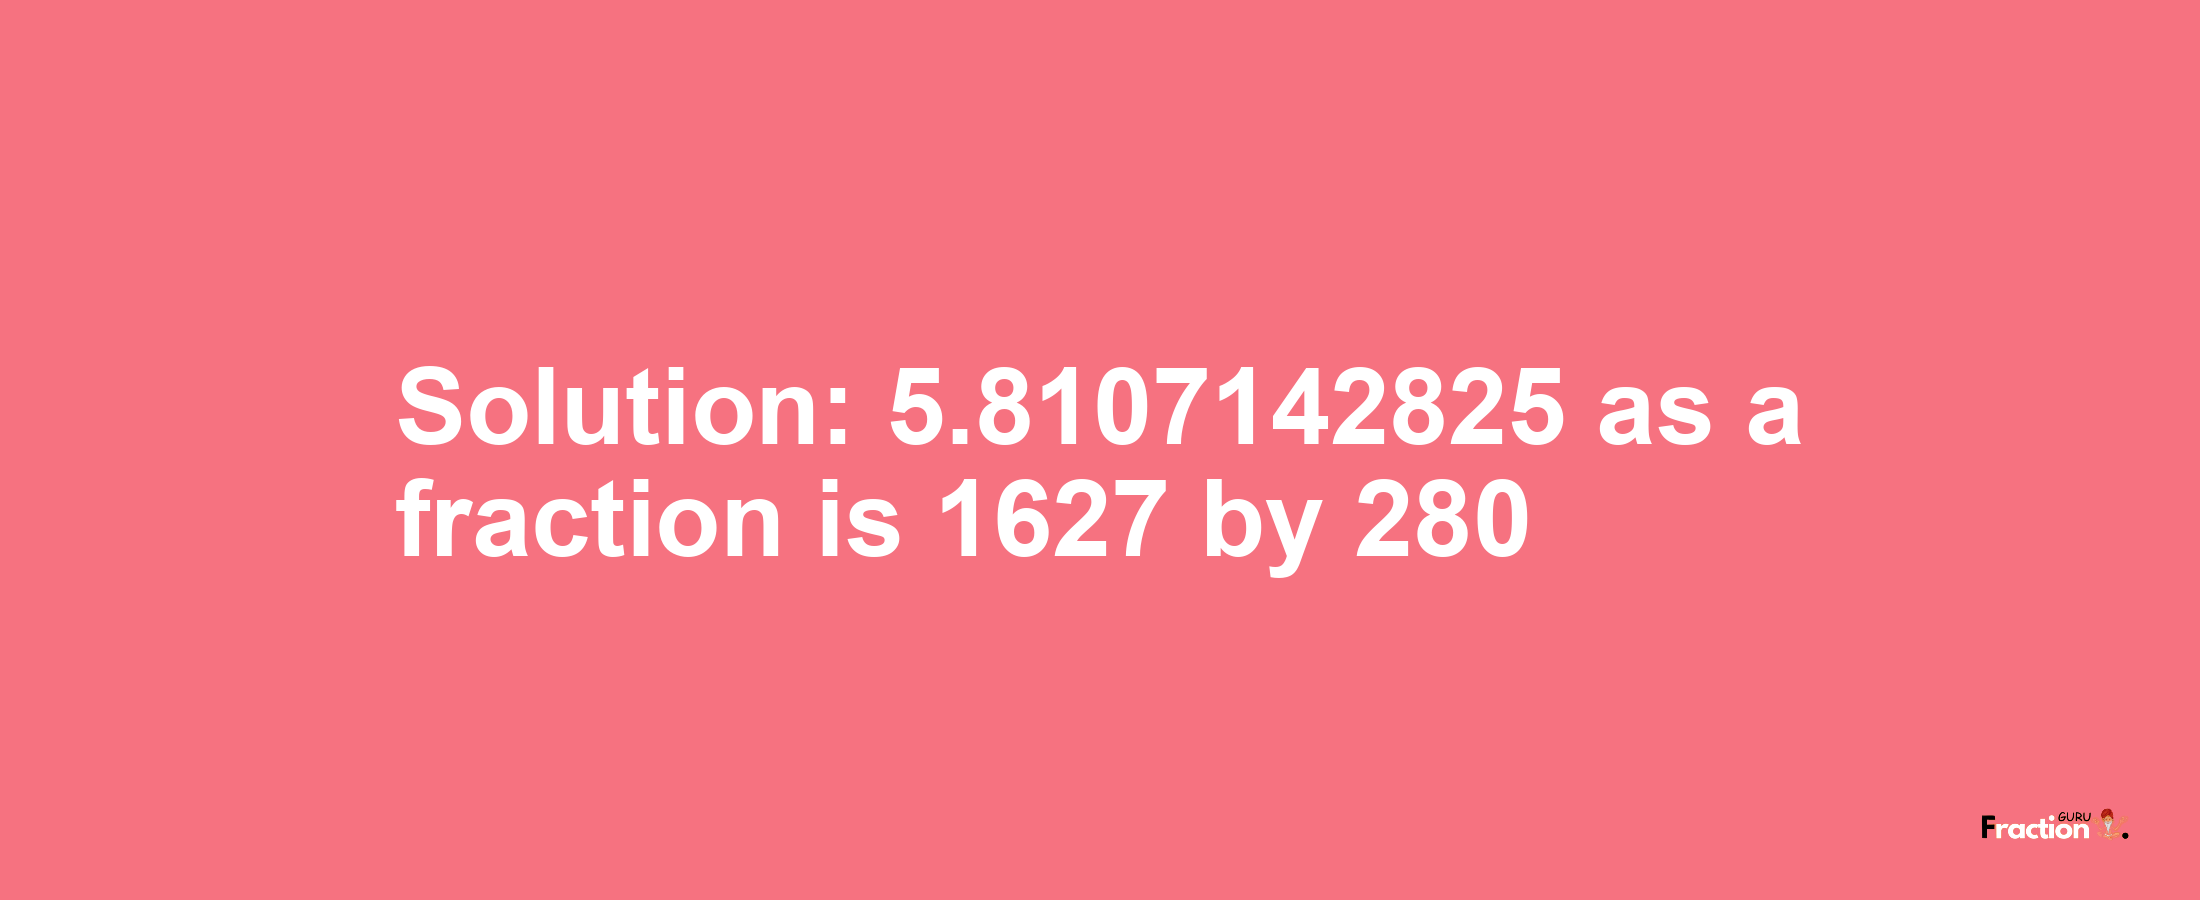 Solution:5.8107142825 as a fraction is 1627/280